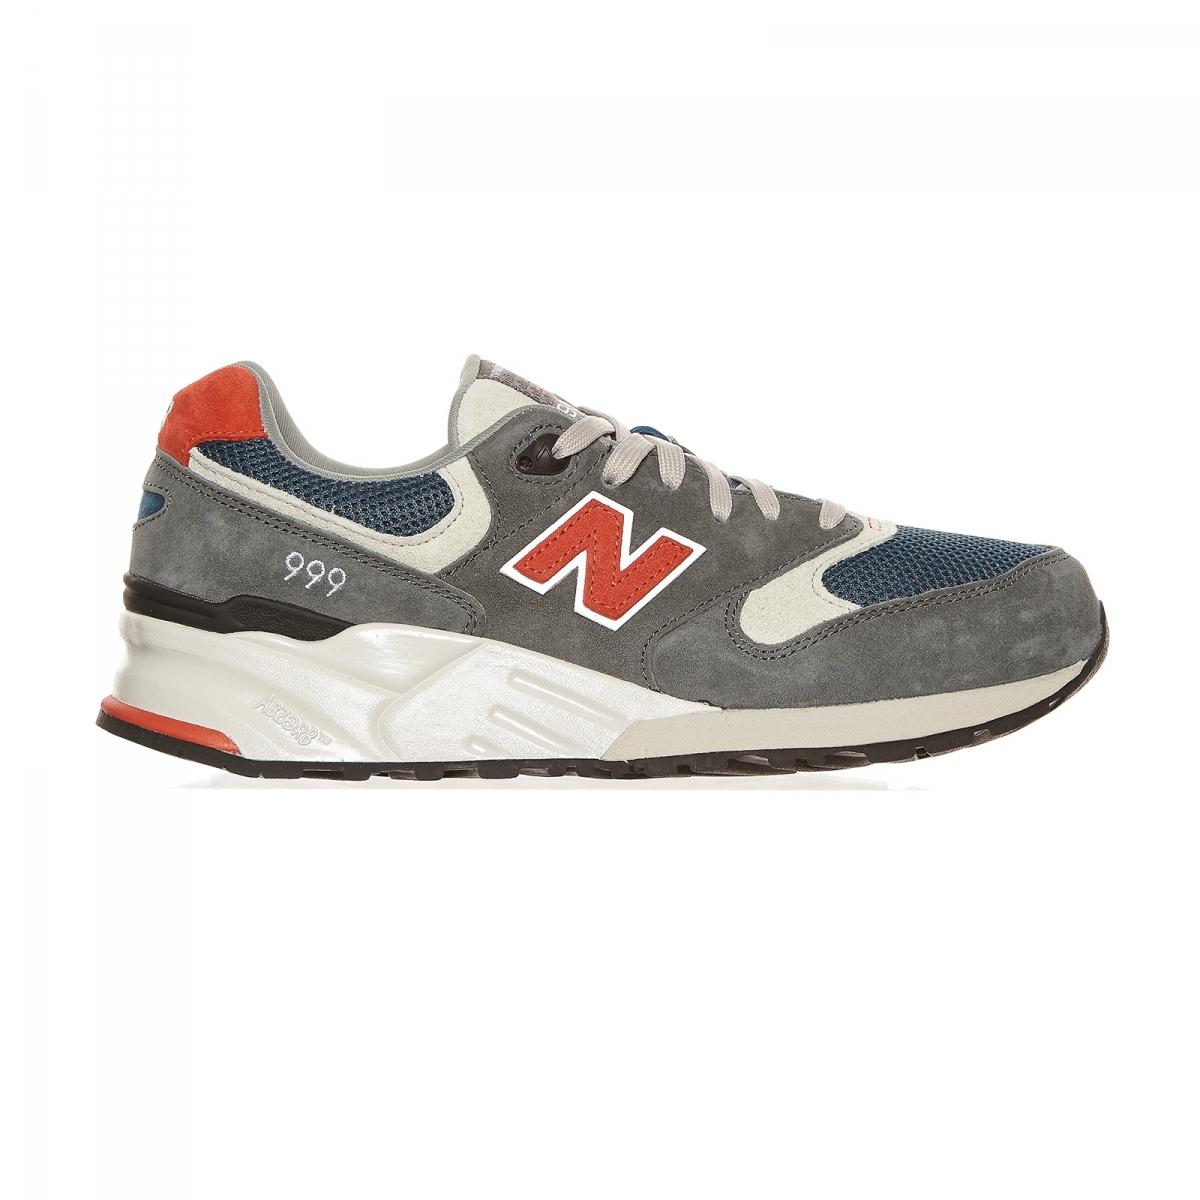 New Balance Ml 999 Ad Sneakers in Grey (Gray) for Men - Lyst